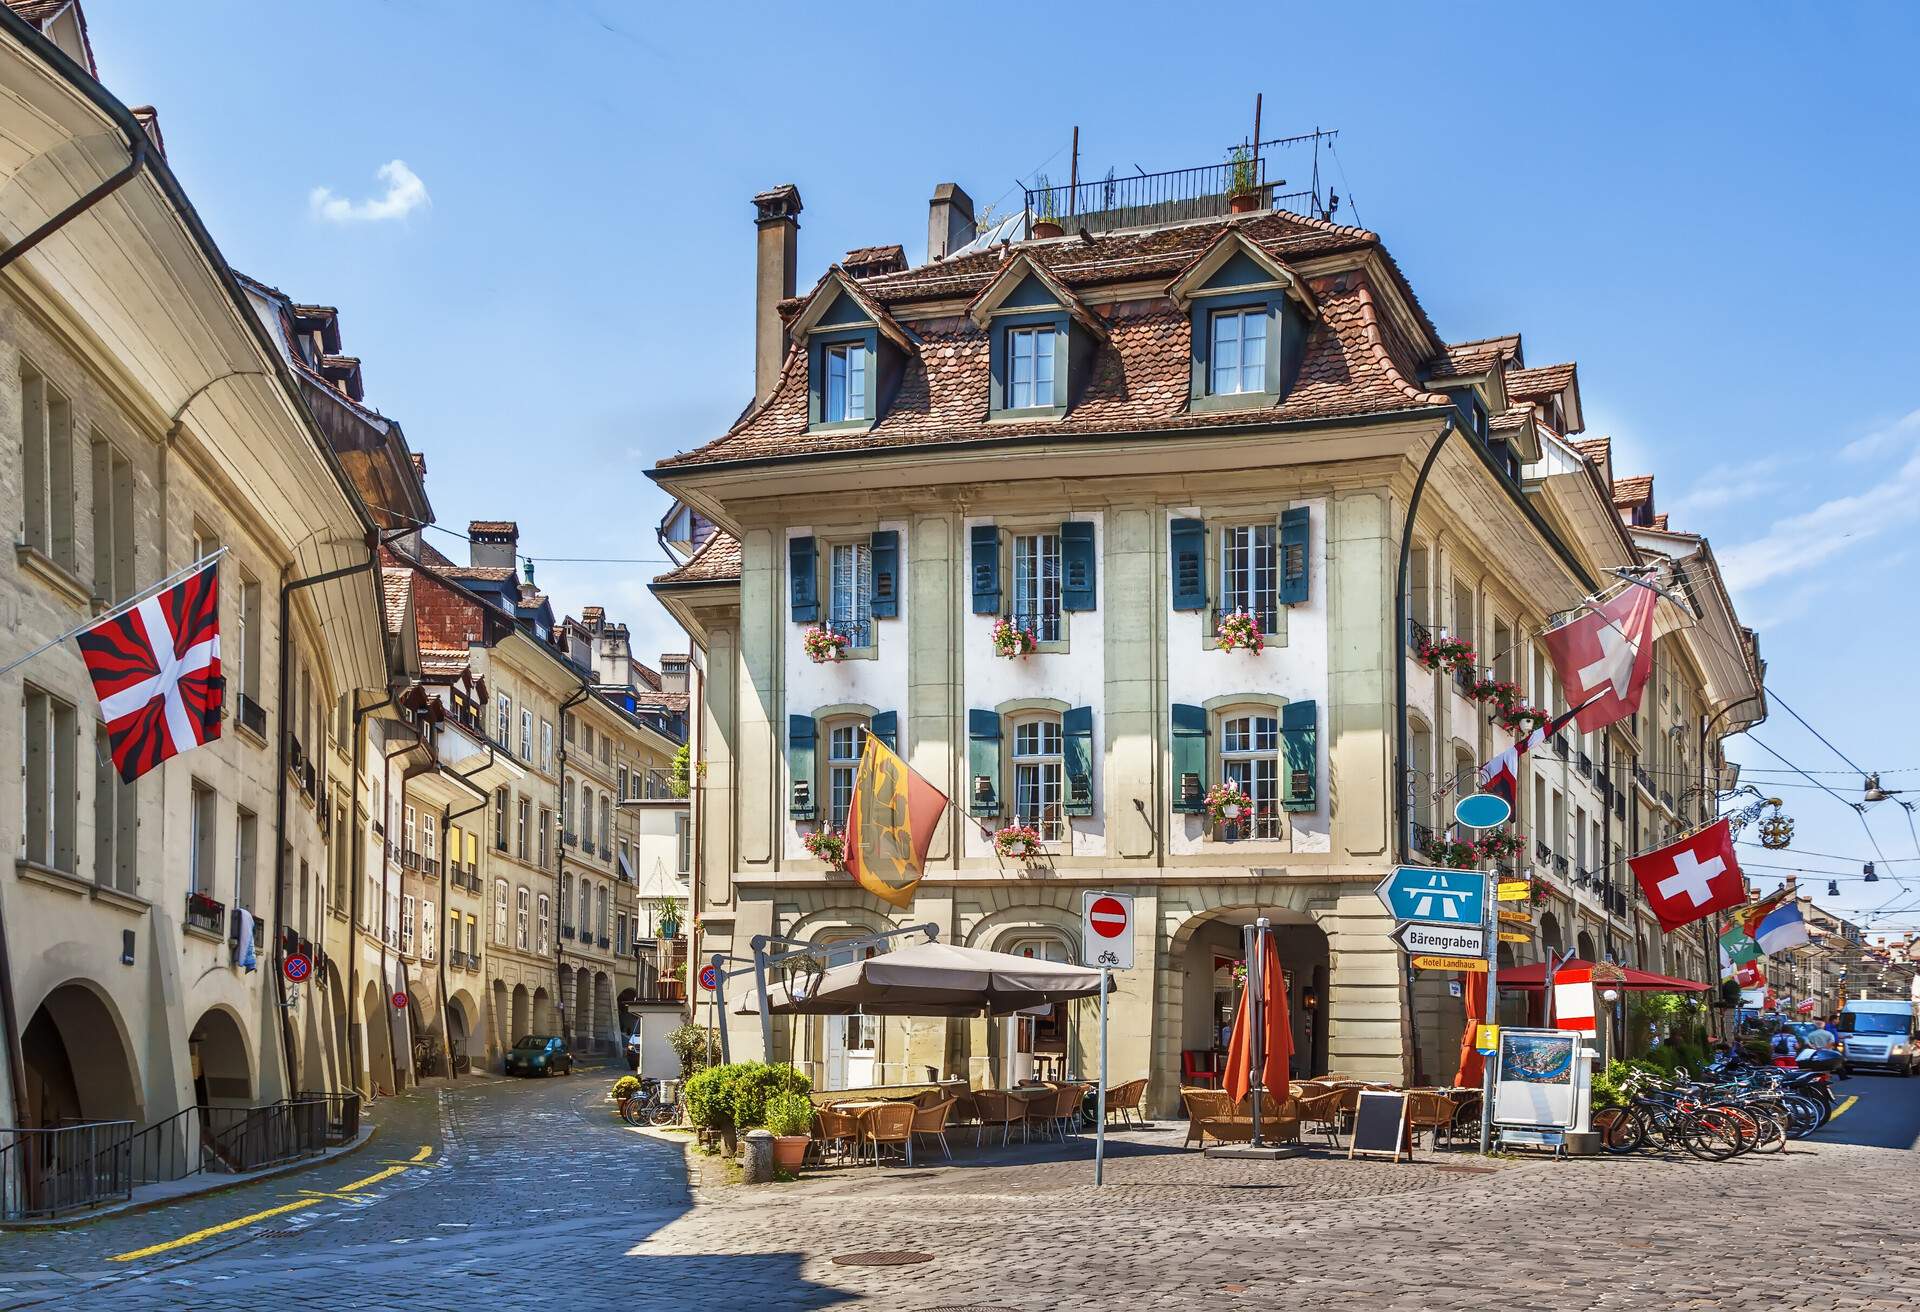 Street with historic houses in Bern downtown, Switzerland